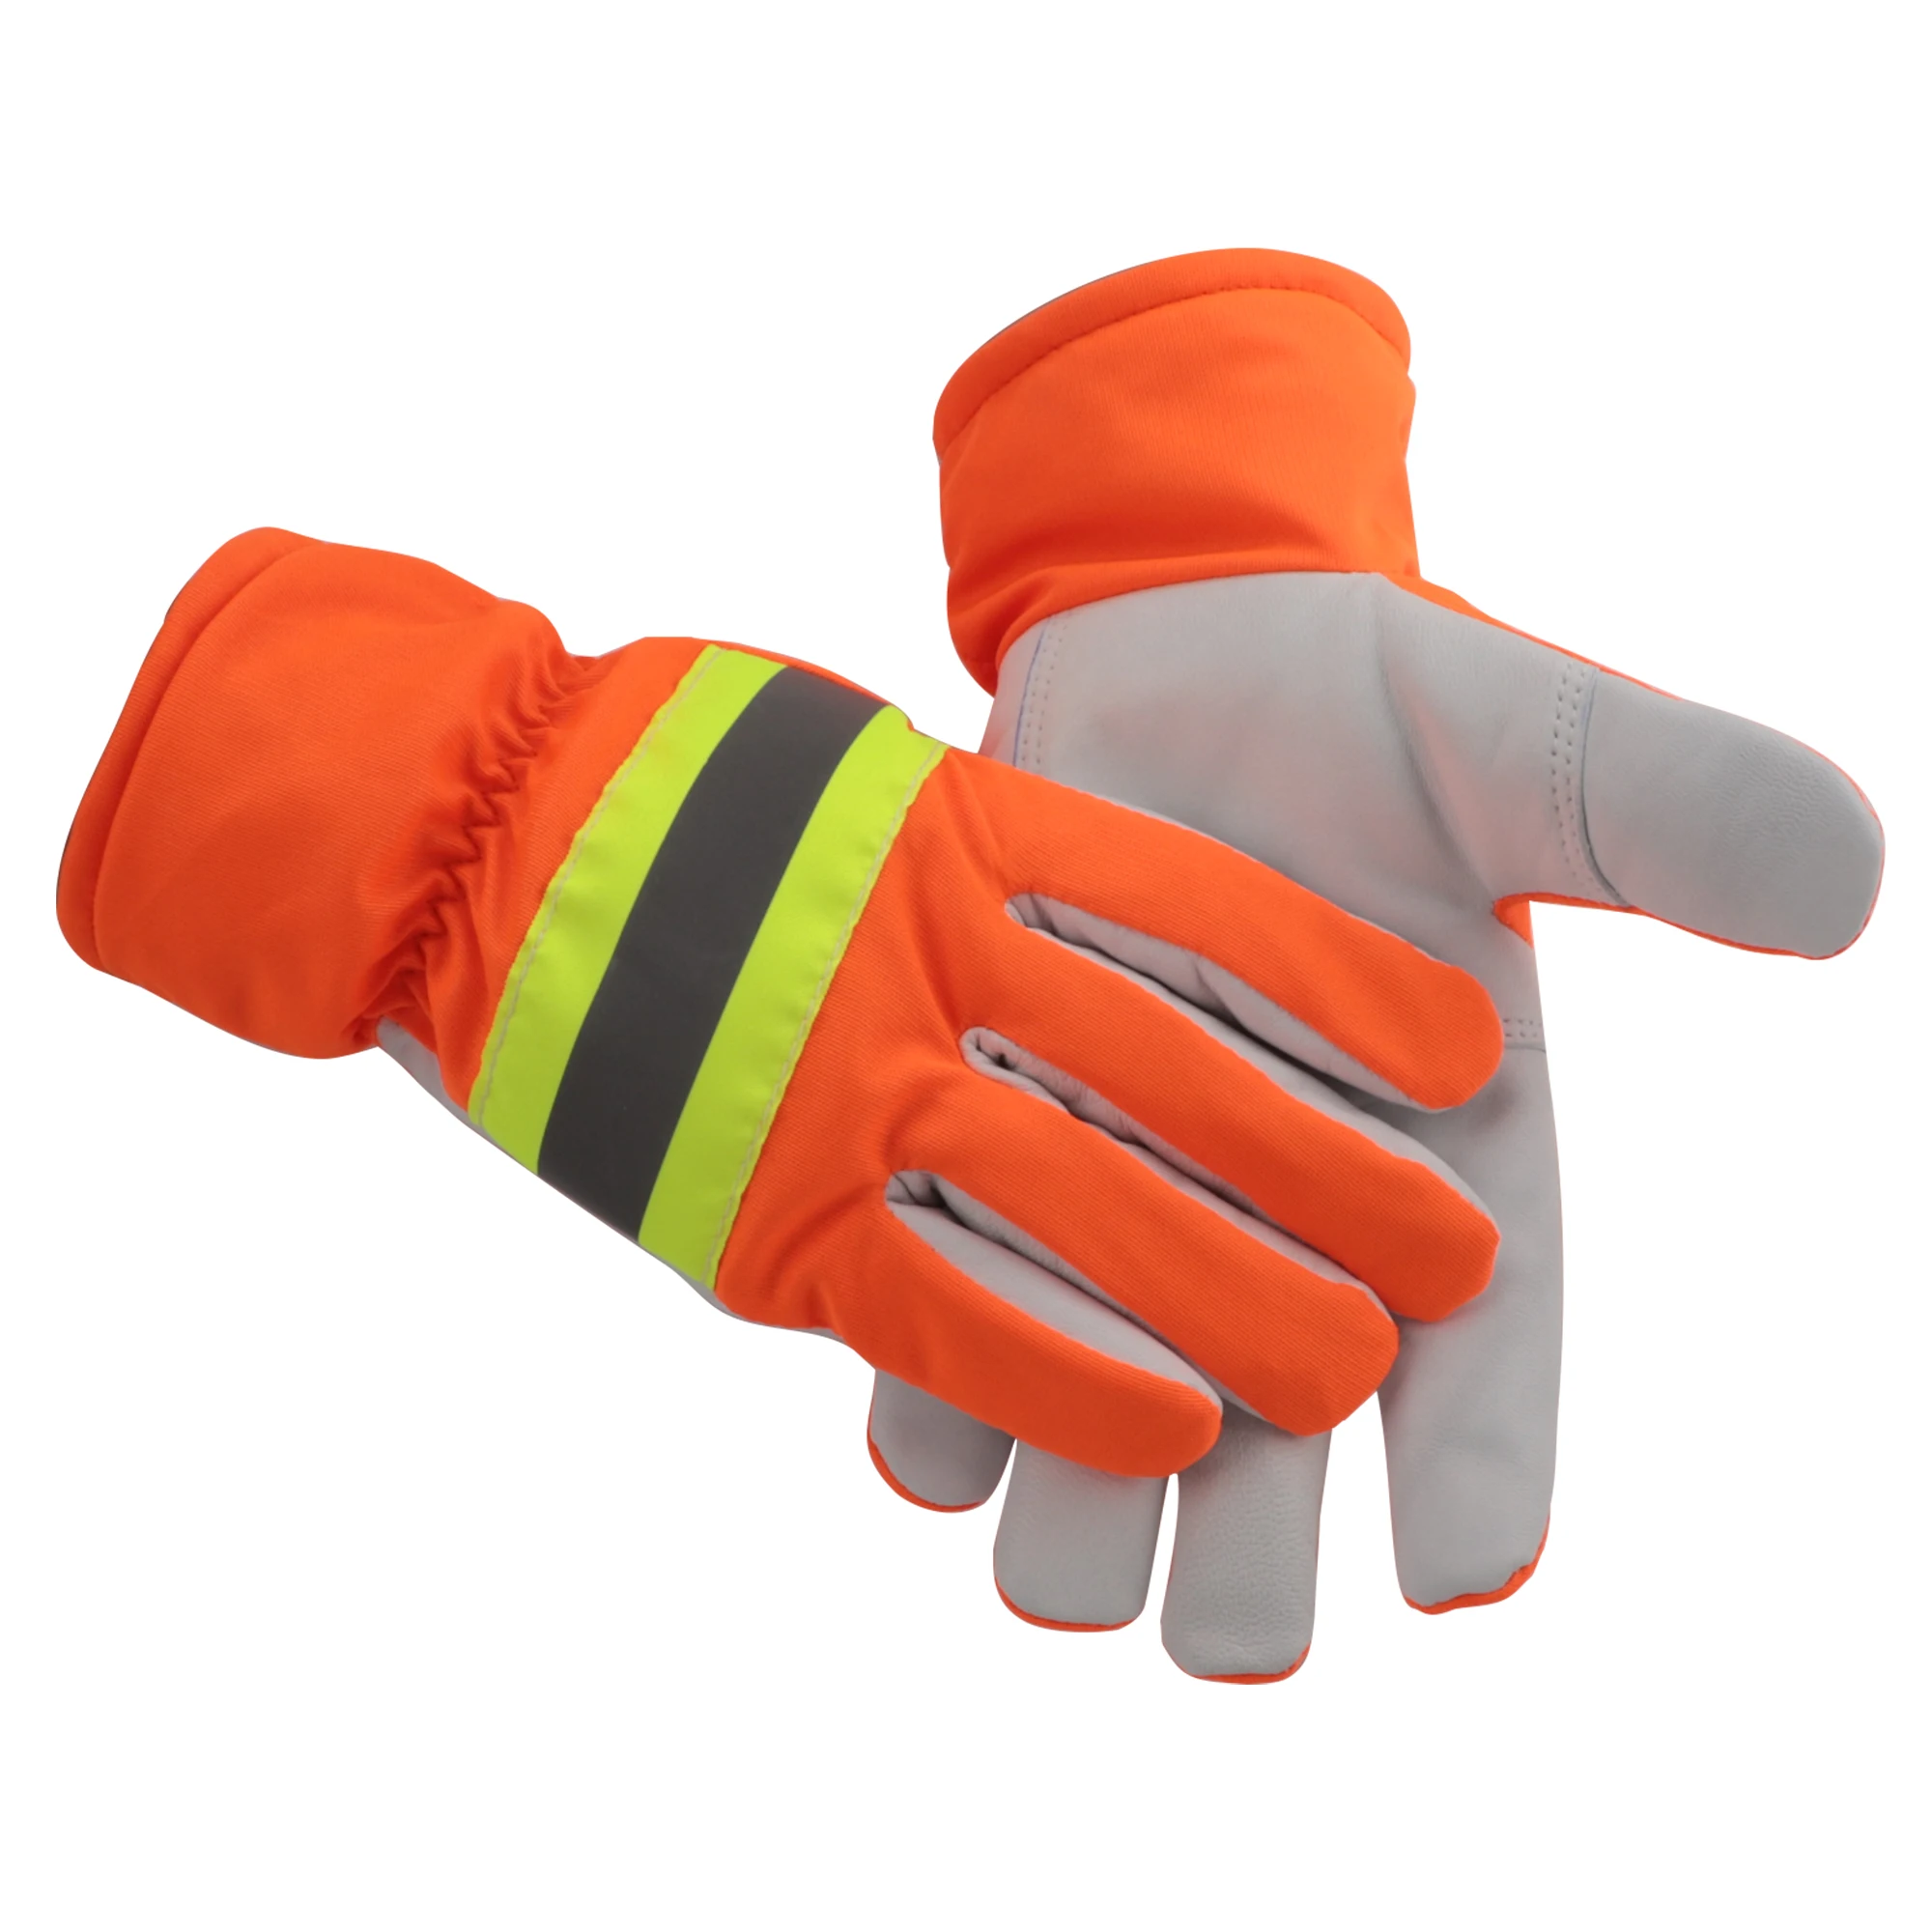 

TMZHISTAR Leather gloves Handing workshop Gloves Driving/Riding/Gardening/Farm - Extremely Soft and Sweat-absorbent